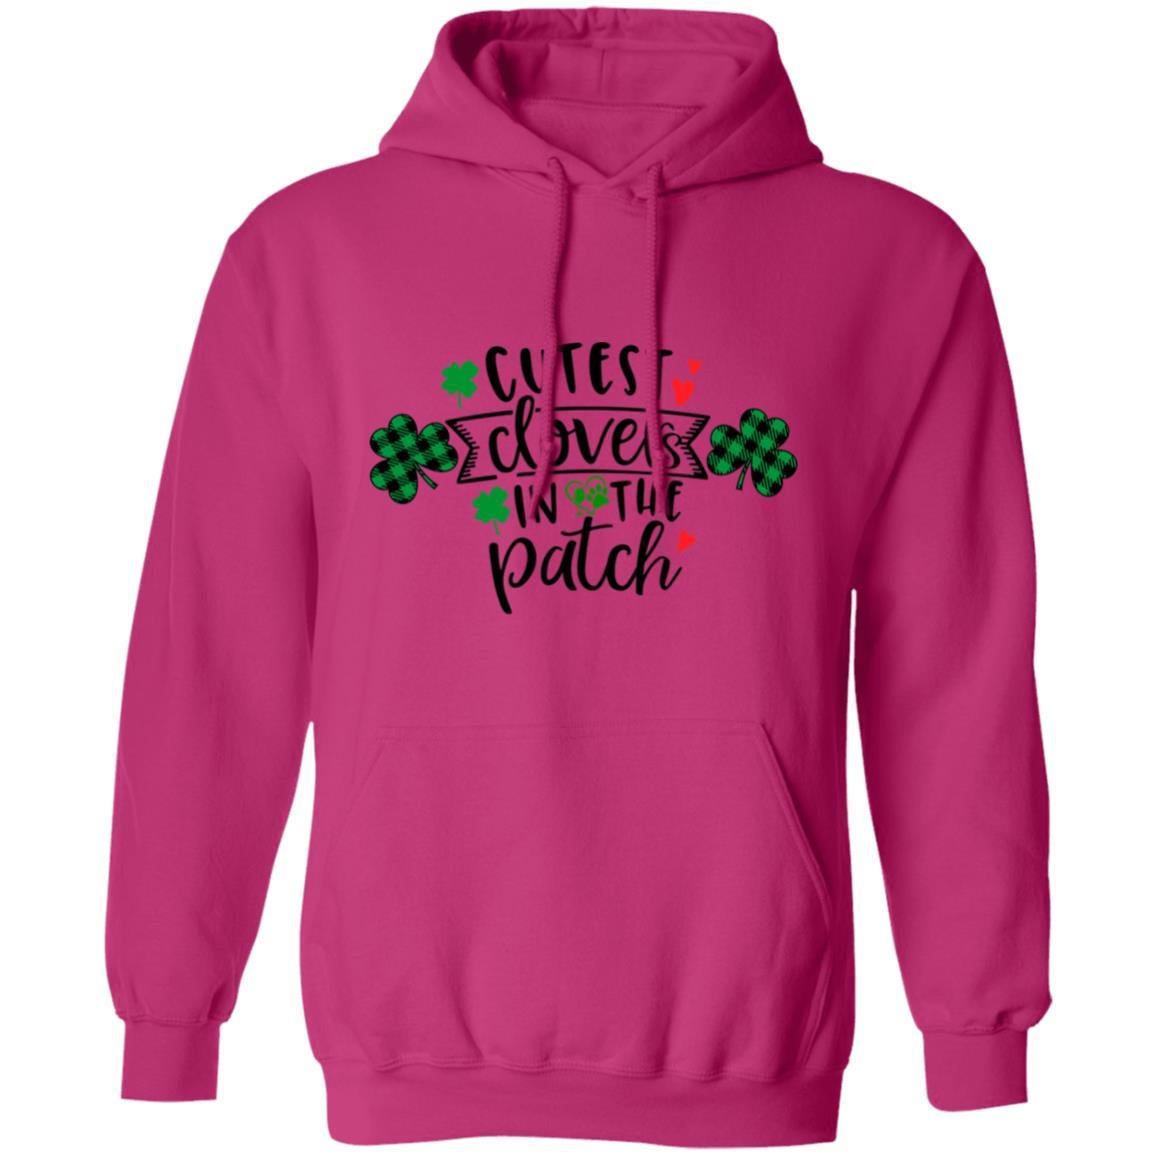 Sweatshirts Heliconia / S Winey Bitches Co "Cutest Clovers in the Patch" Pullover Hoodie 8 oz. WineyBitchesCo